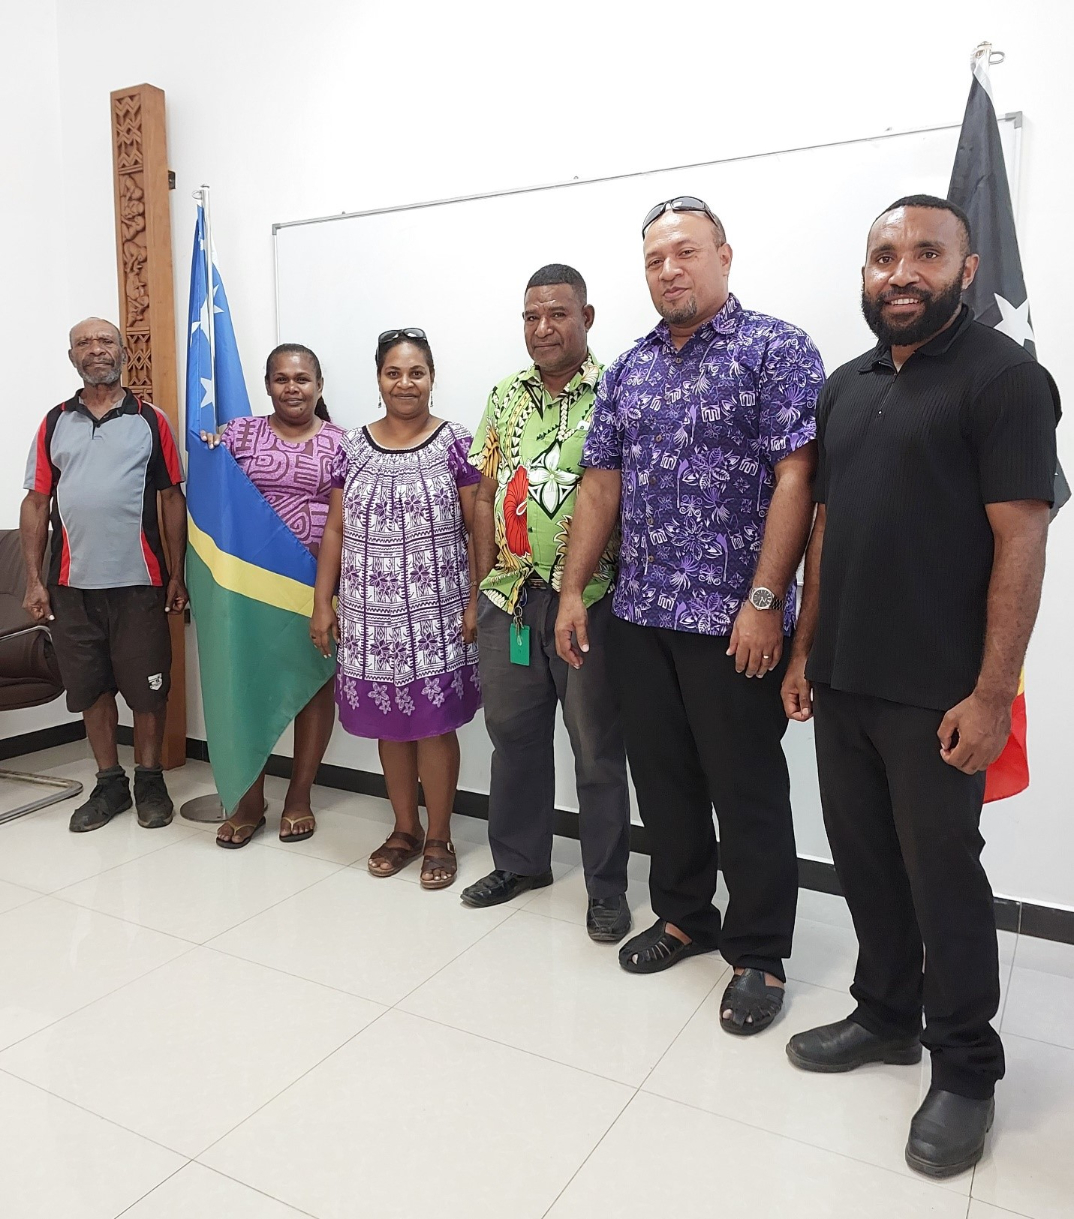 Solomon Islands High Commission staff at Port Moresby 